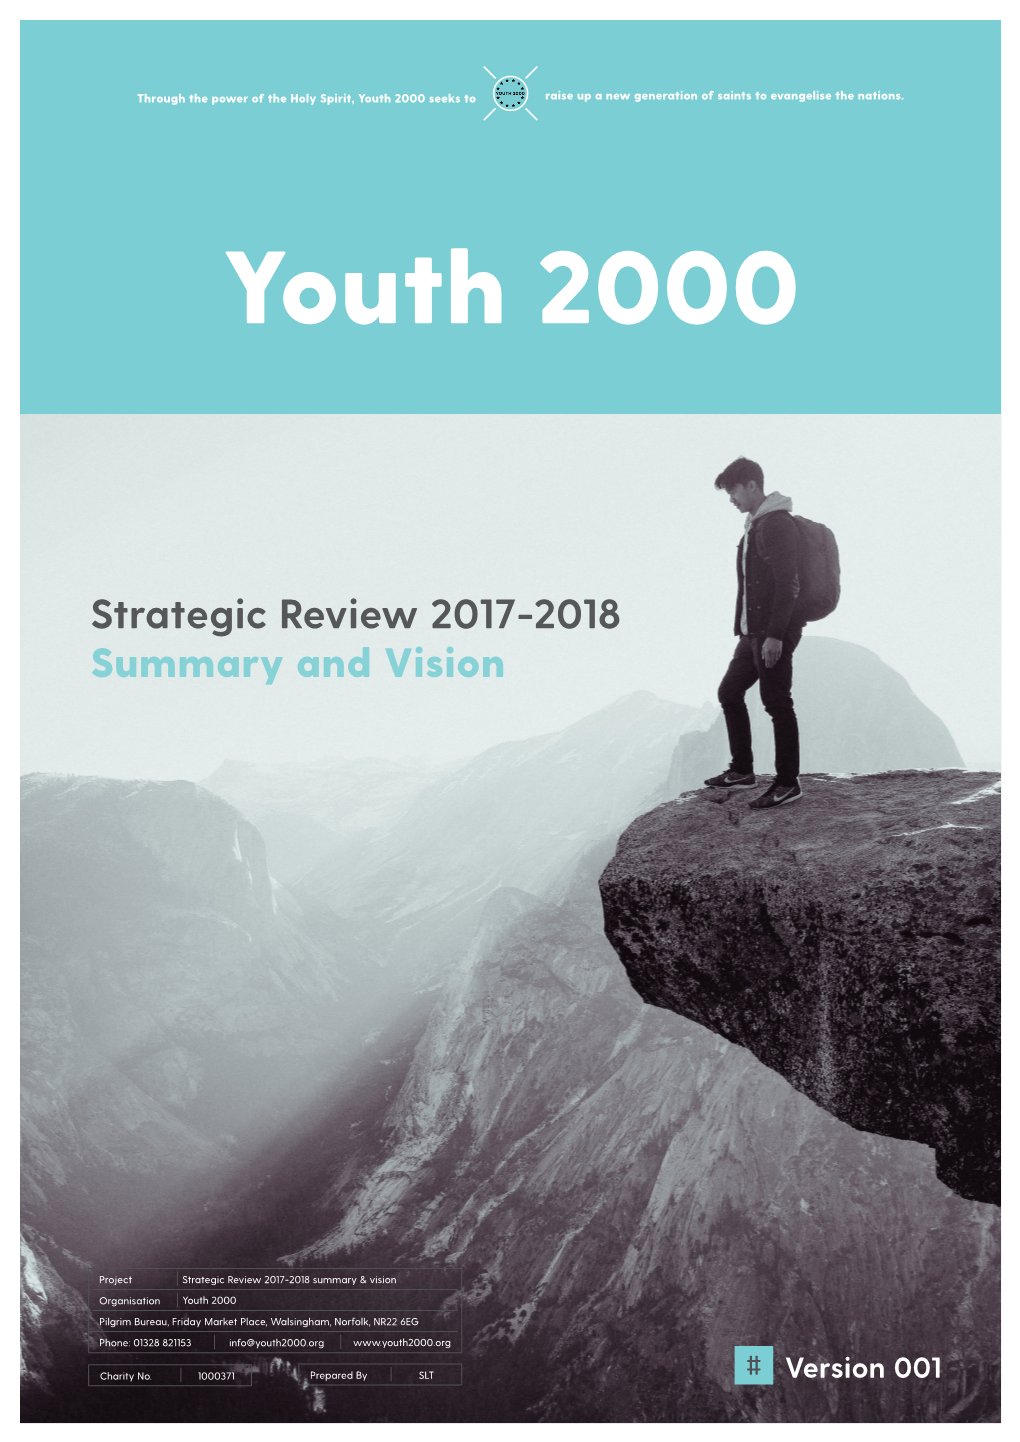 Strategic Review 2017-2018 Summary and Vision